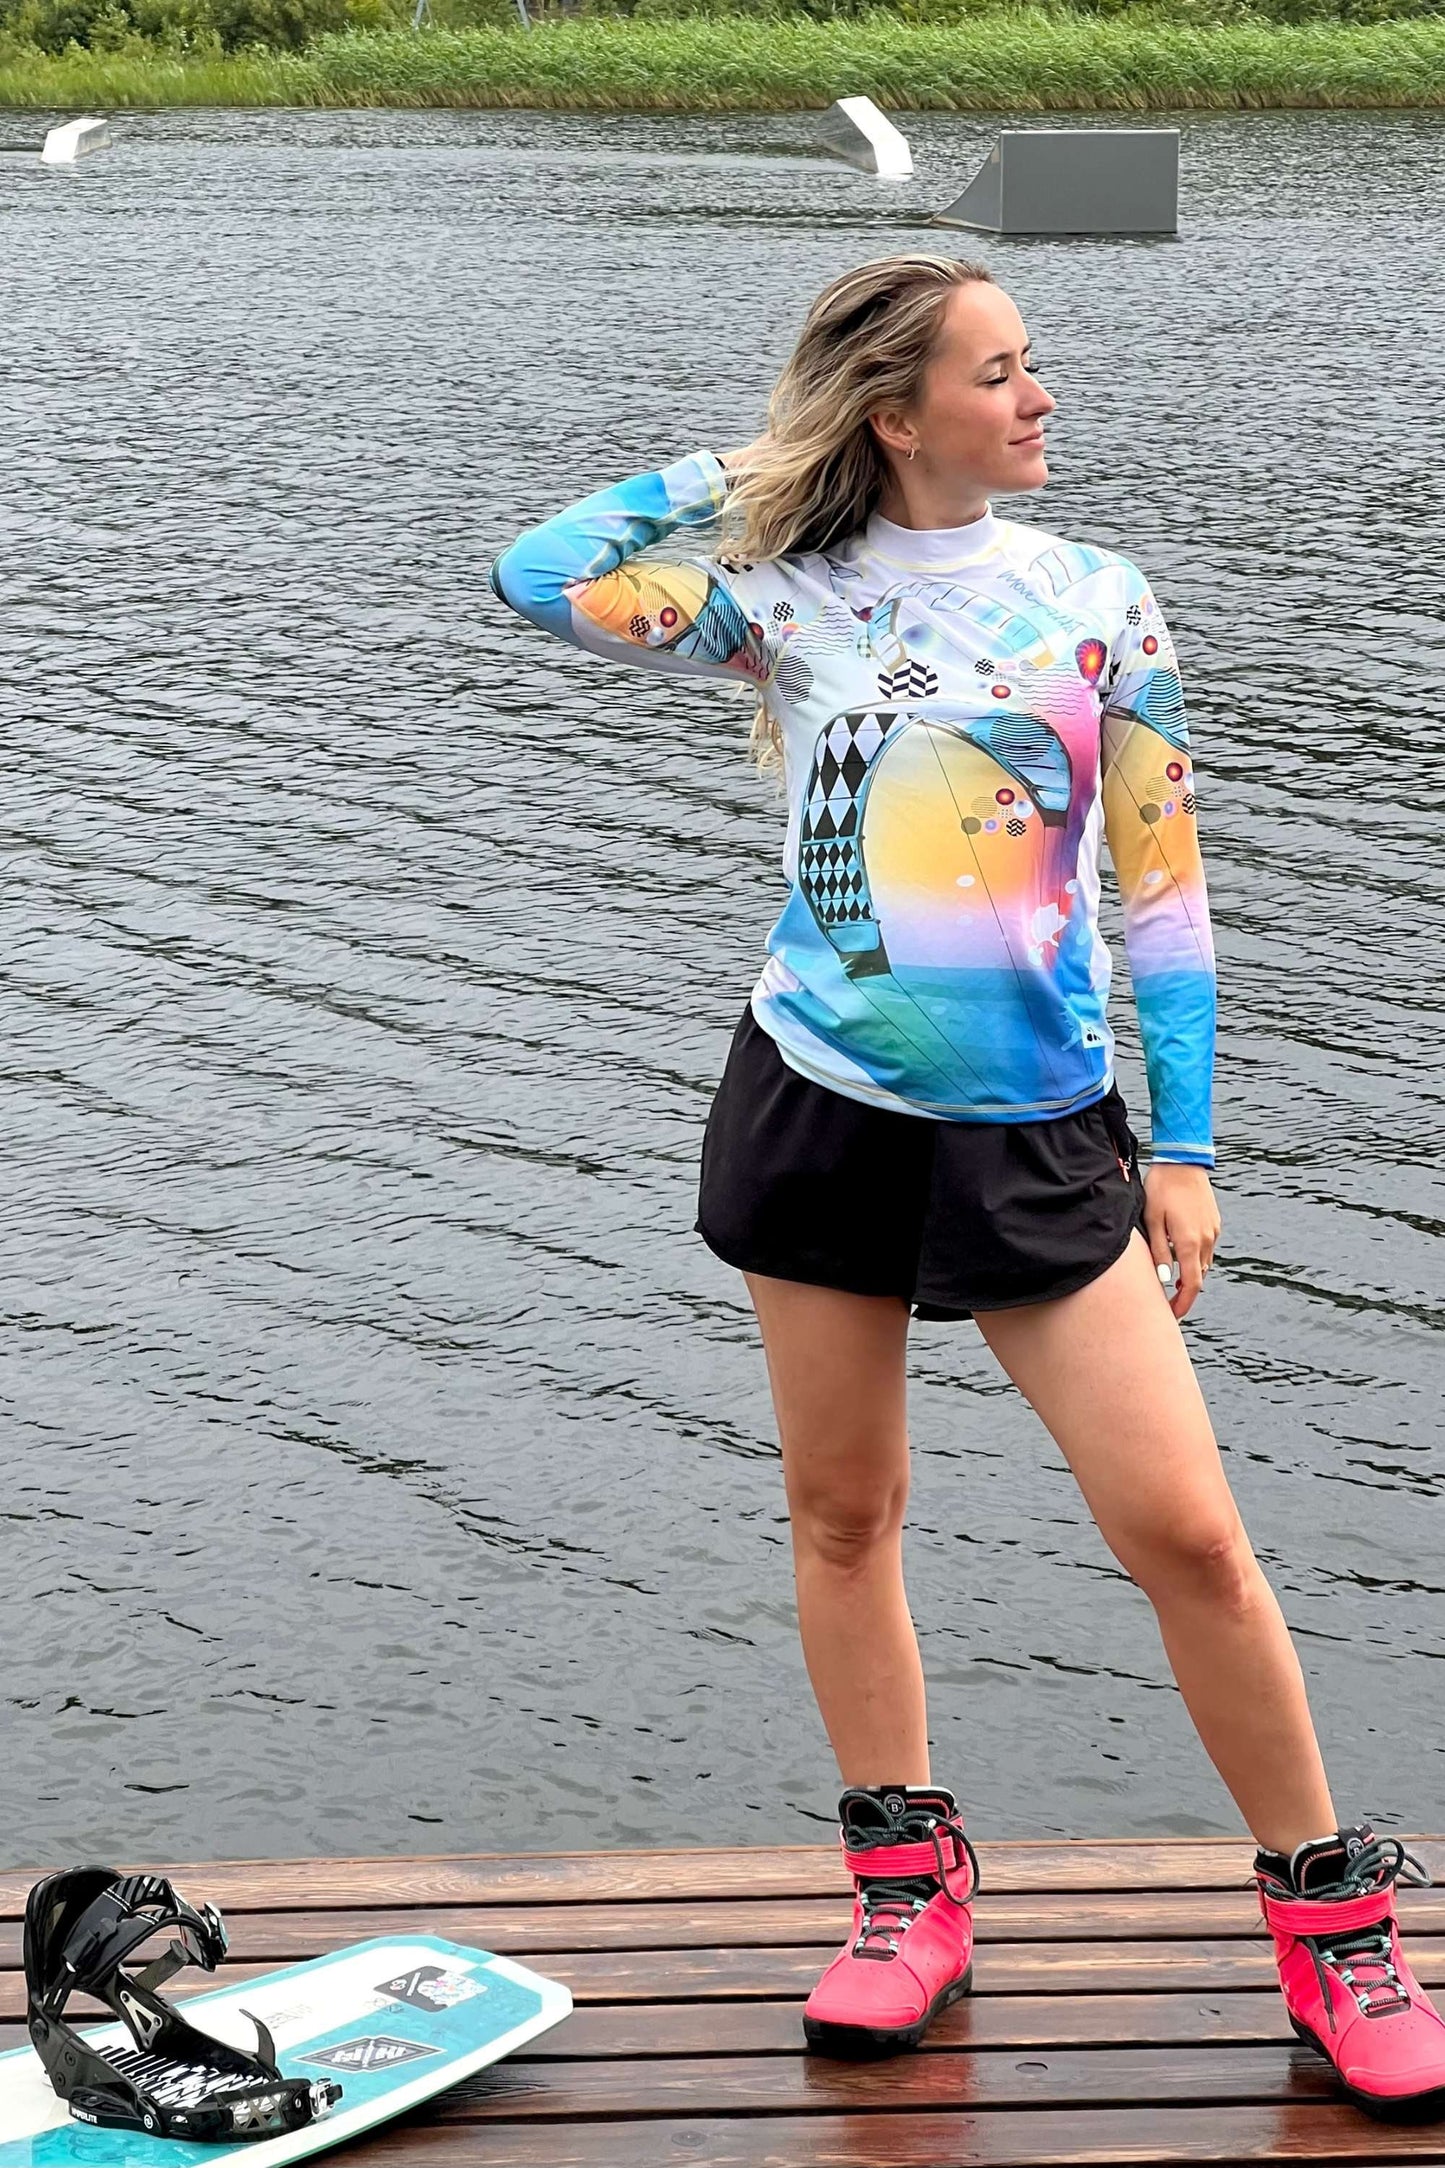 Women's Long Sleeve Rash Guard| Women's Lycra, Rash| Summer water sports outfit| Active lifestyle| Sun and wind protection